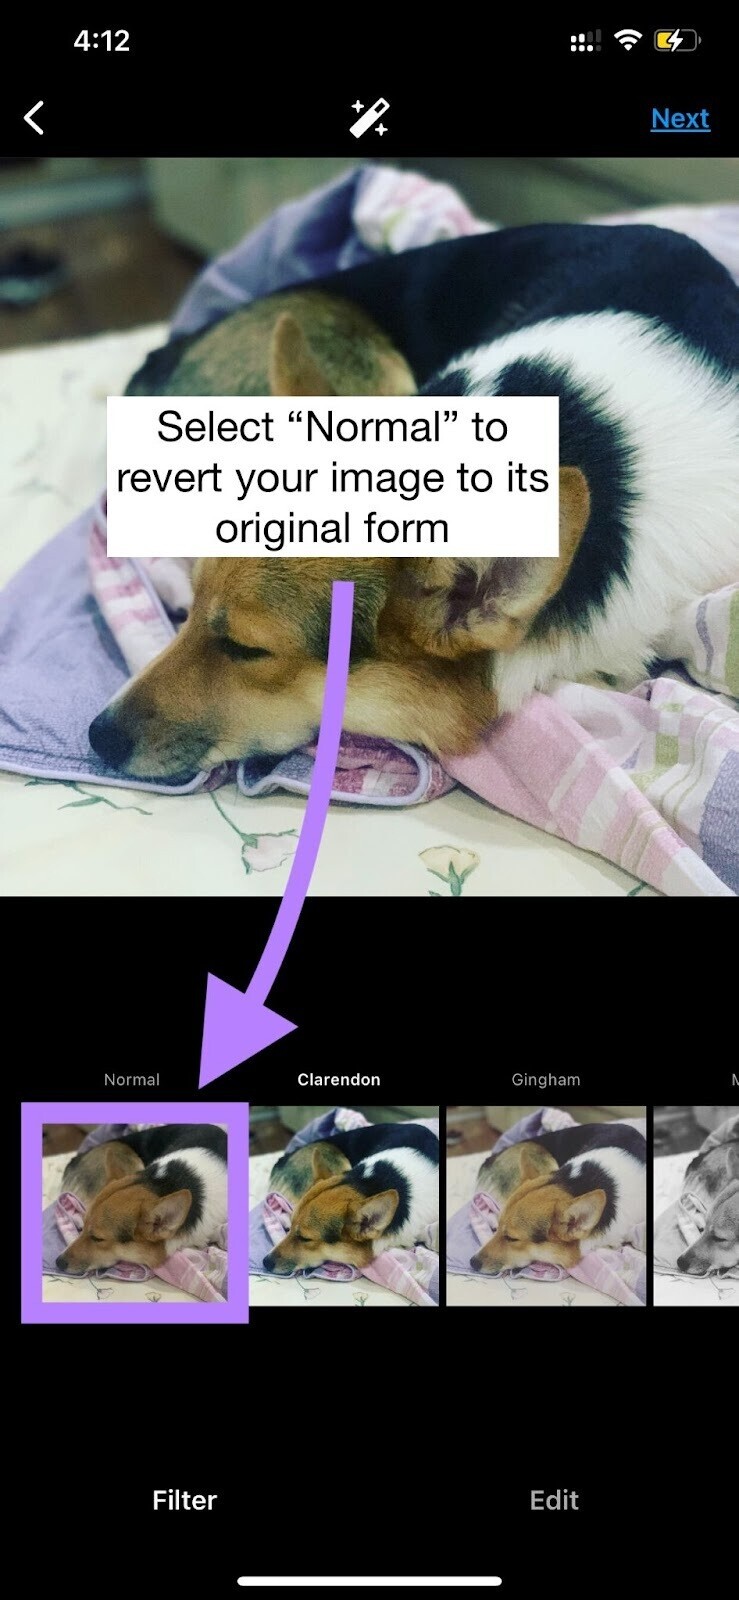 using “Normal” filter on Instagram images reverts your image to its original form